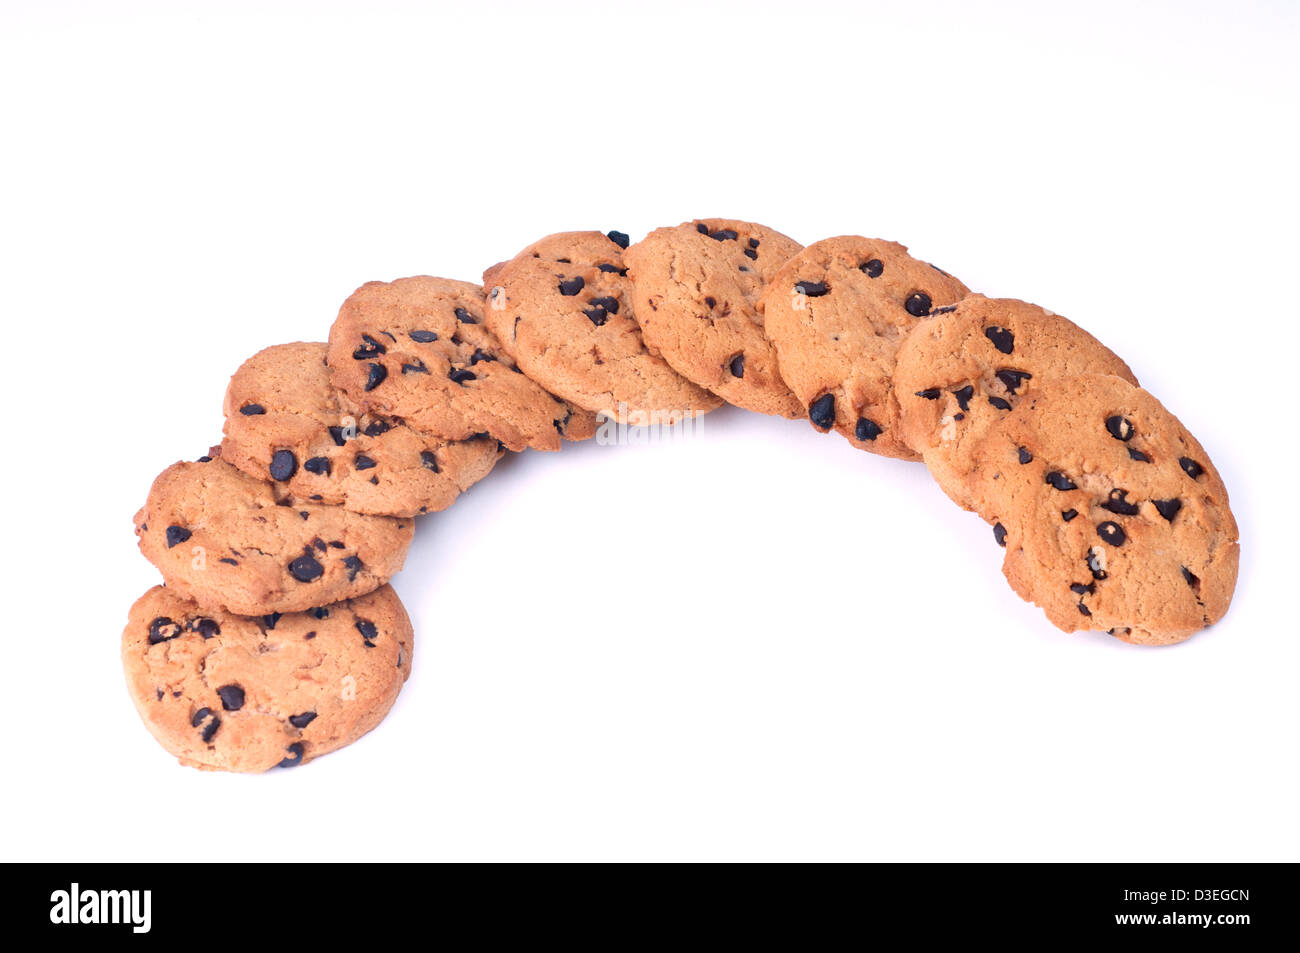 Cookie chips with dark chocolate in crescent shape Stock Photo